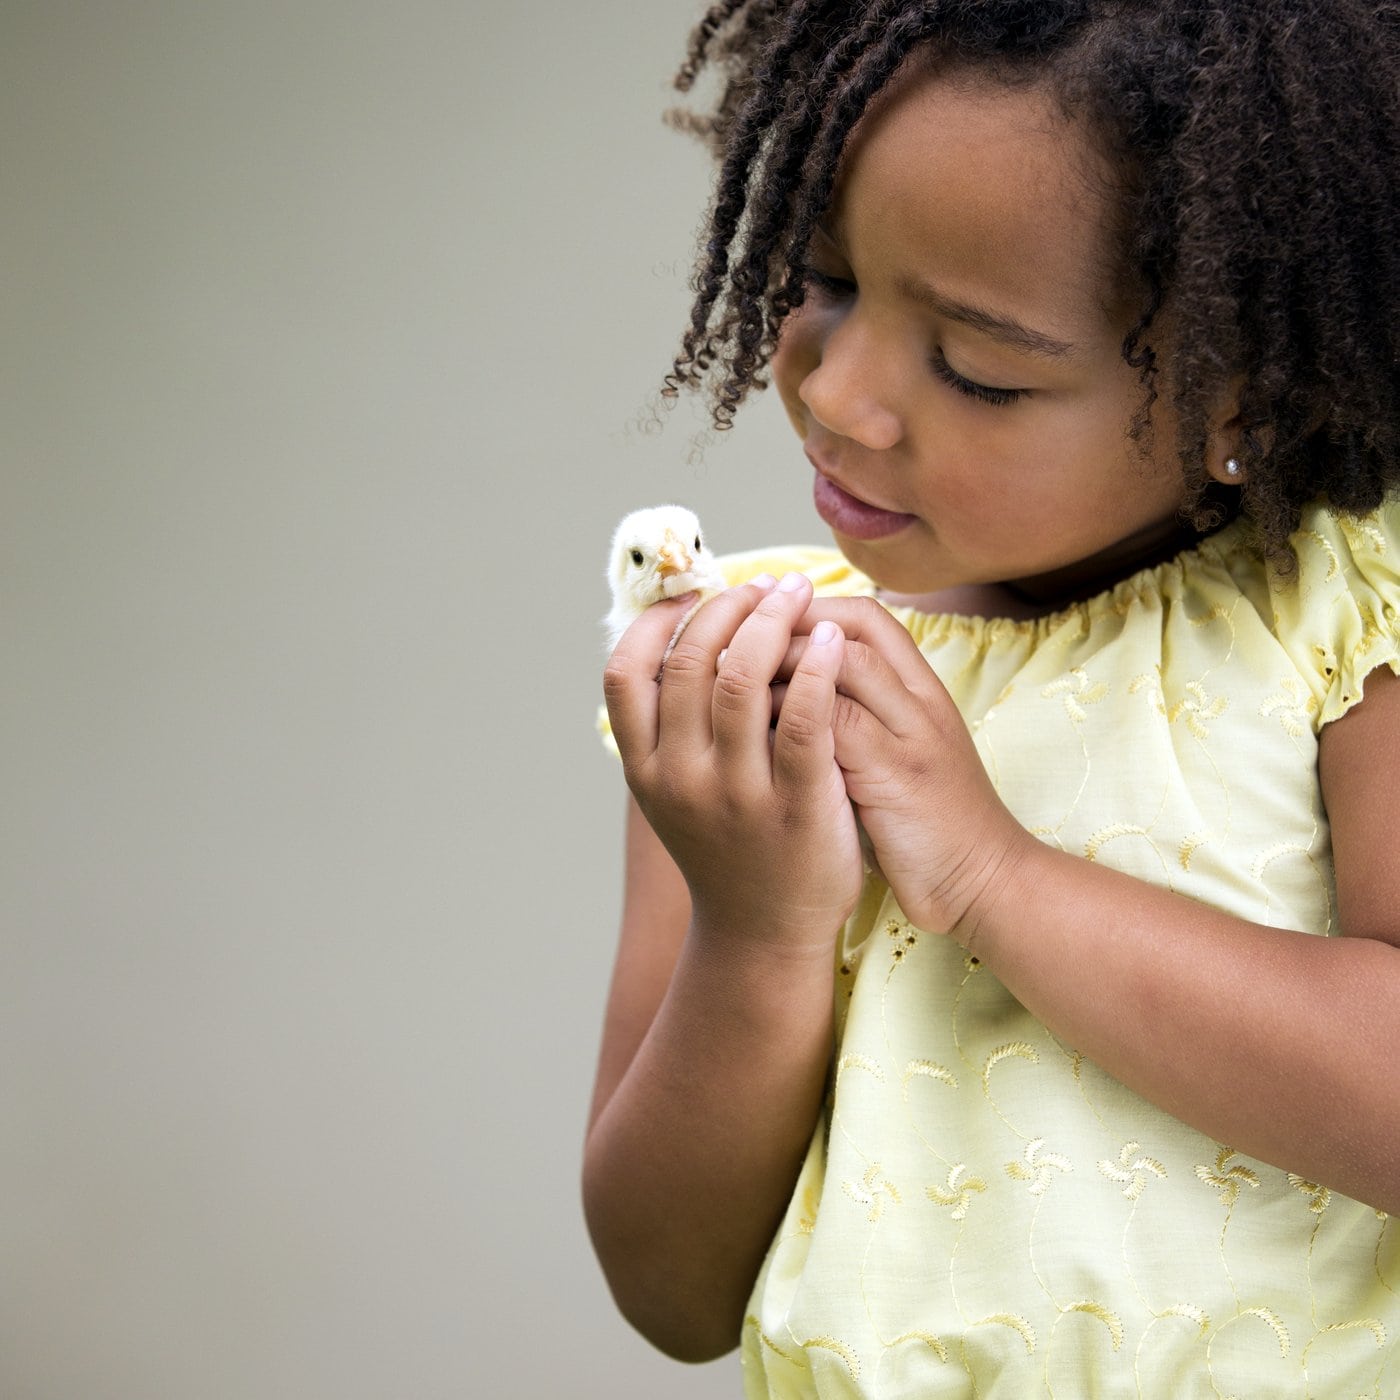 Girl gently holding a baby chick - chicken